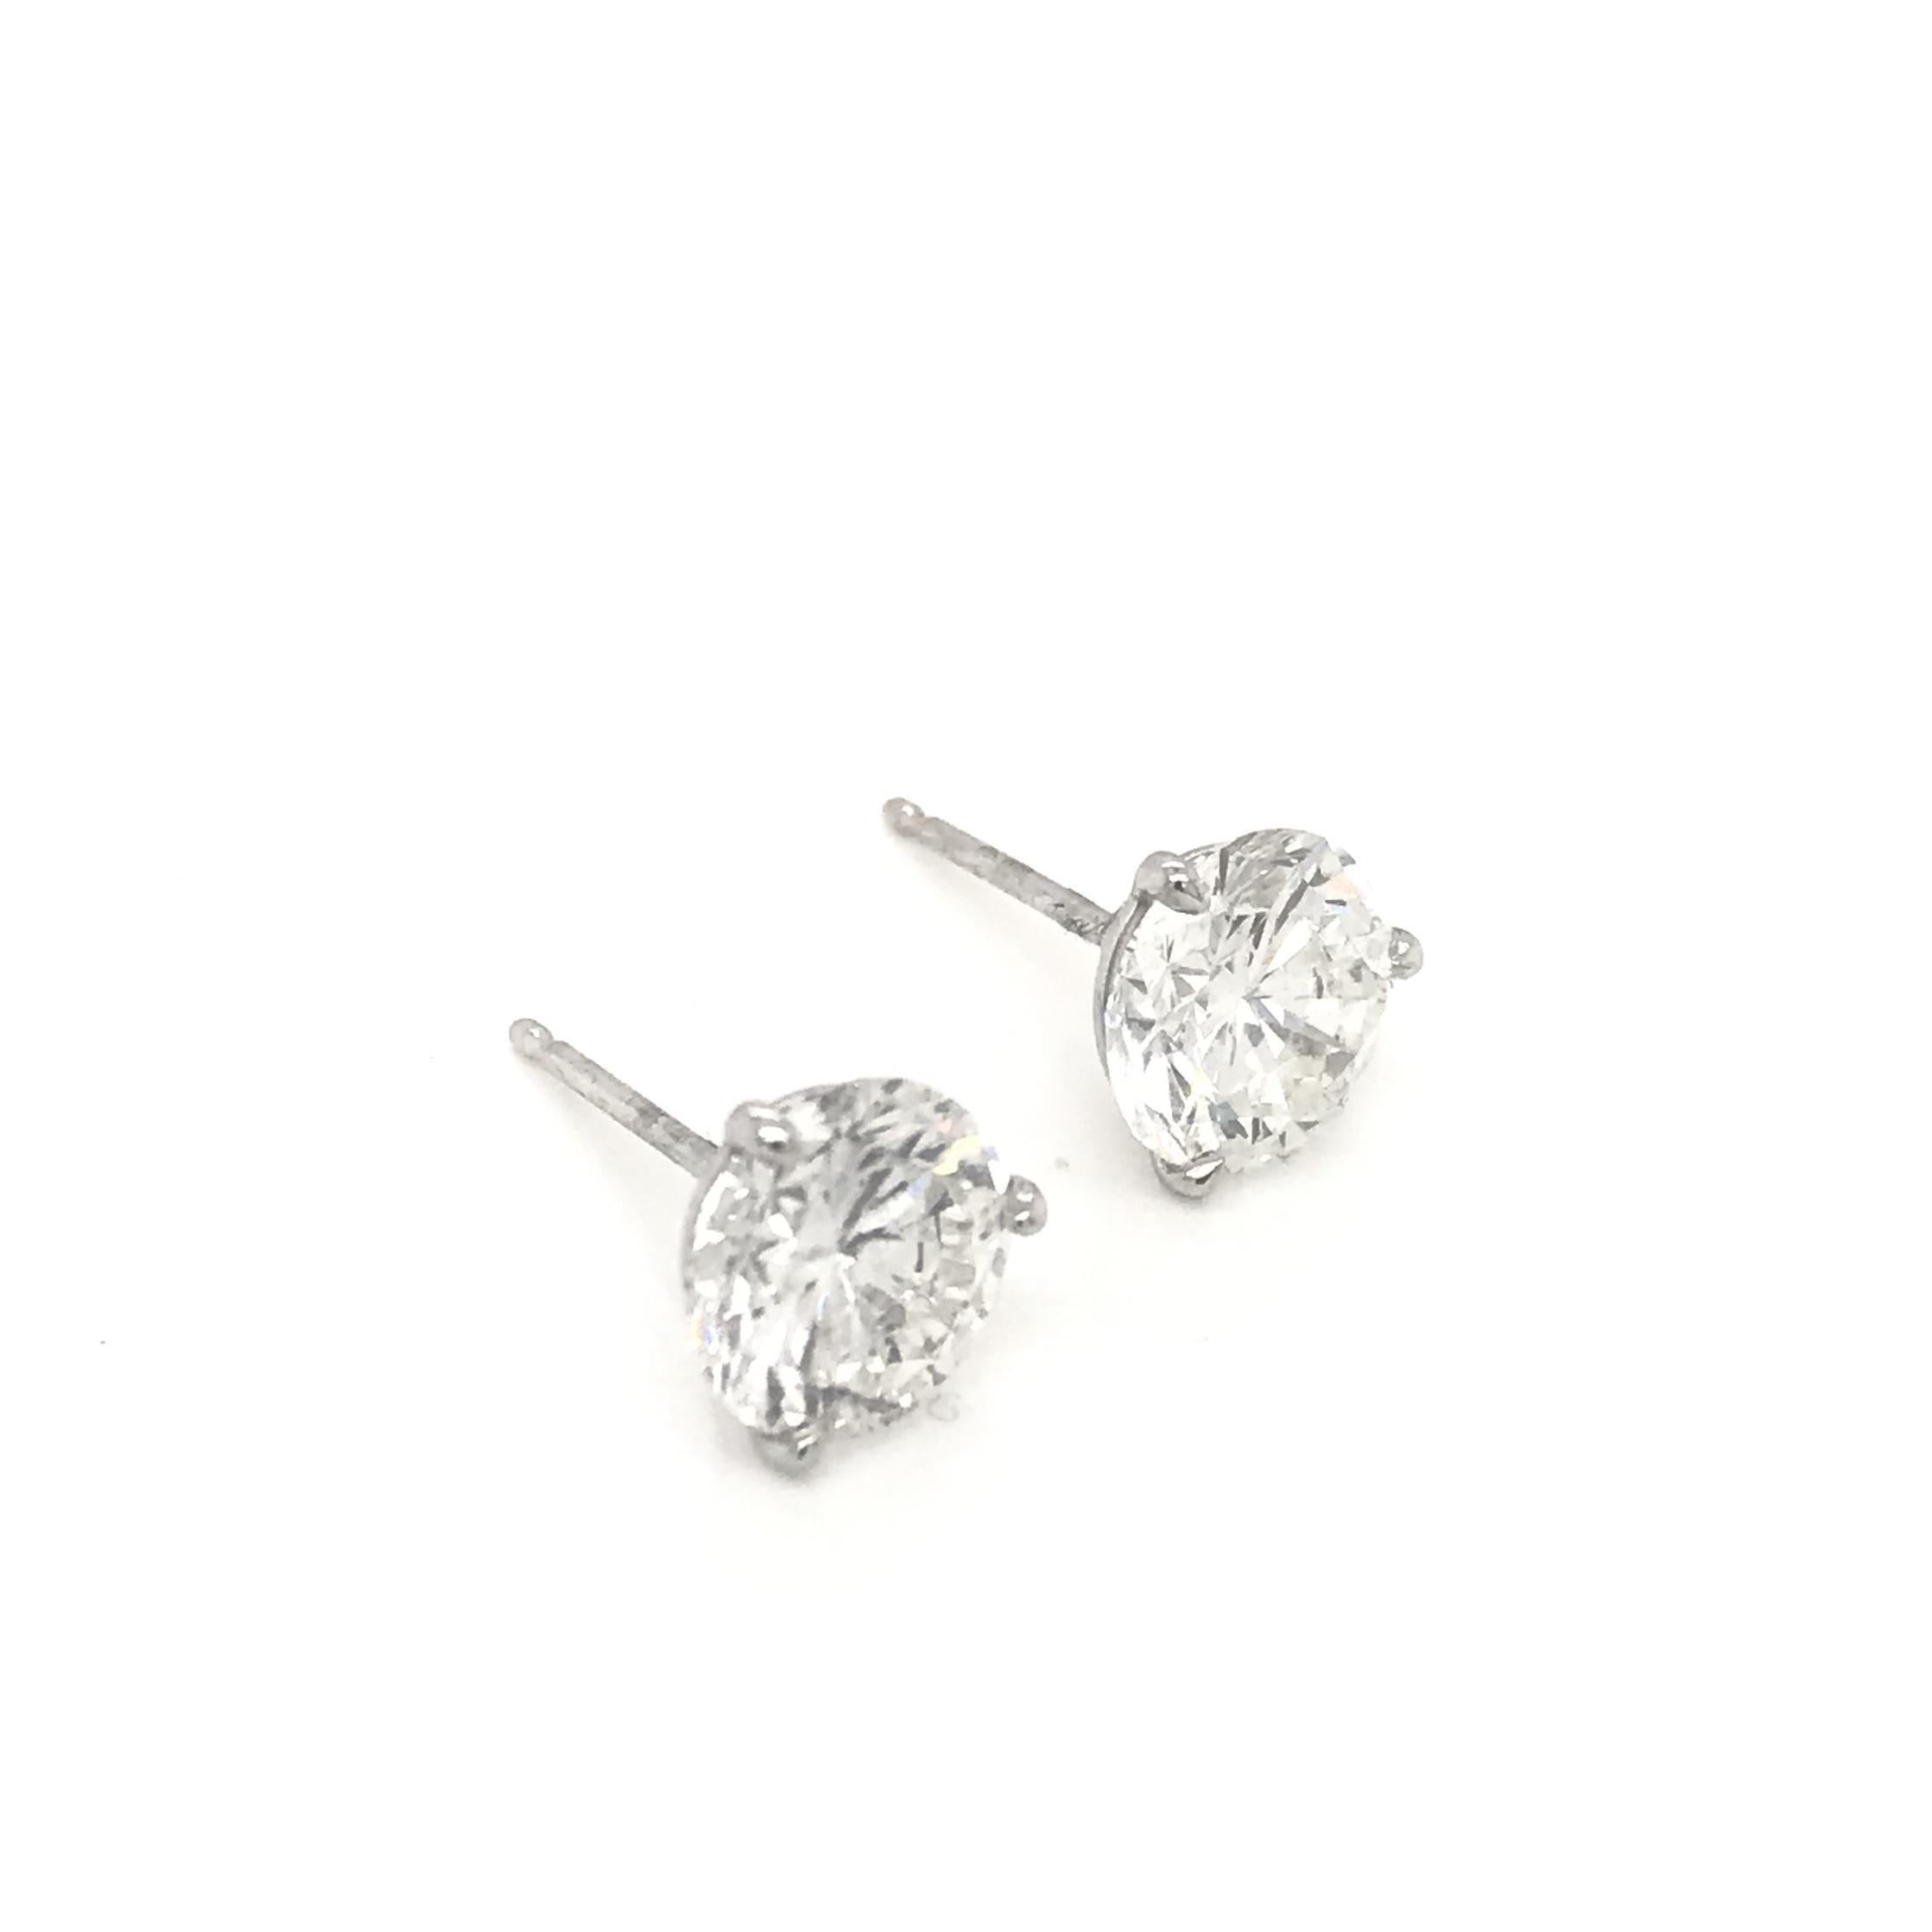 Round Cut Contemporary 3 Carat Total Weight Diamond Stud Earrings